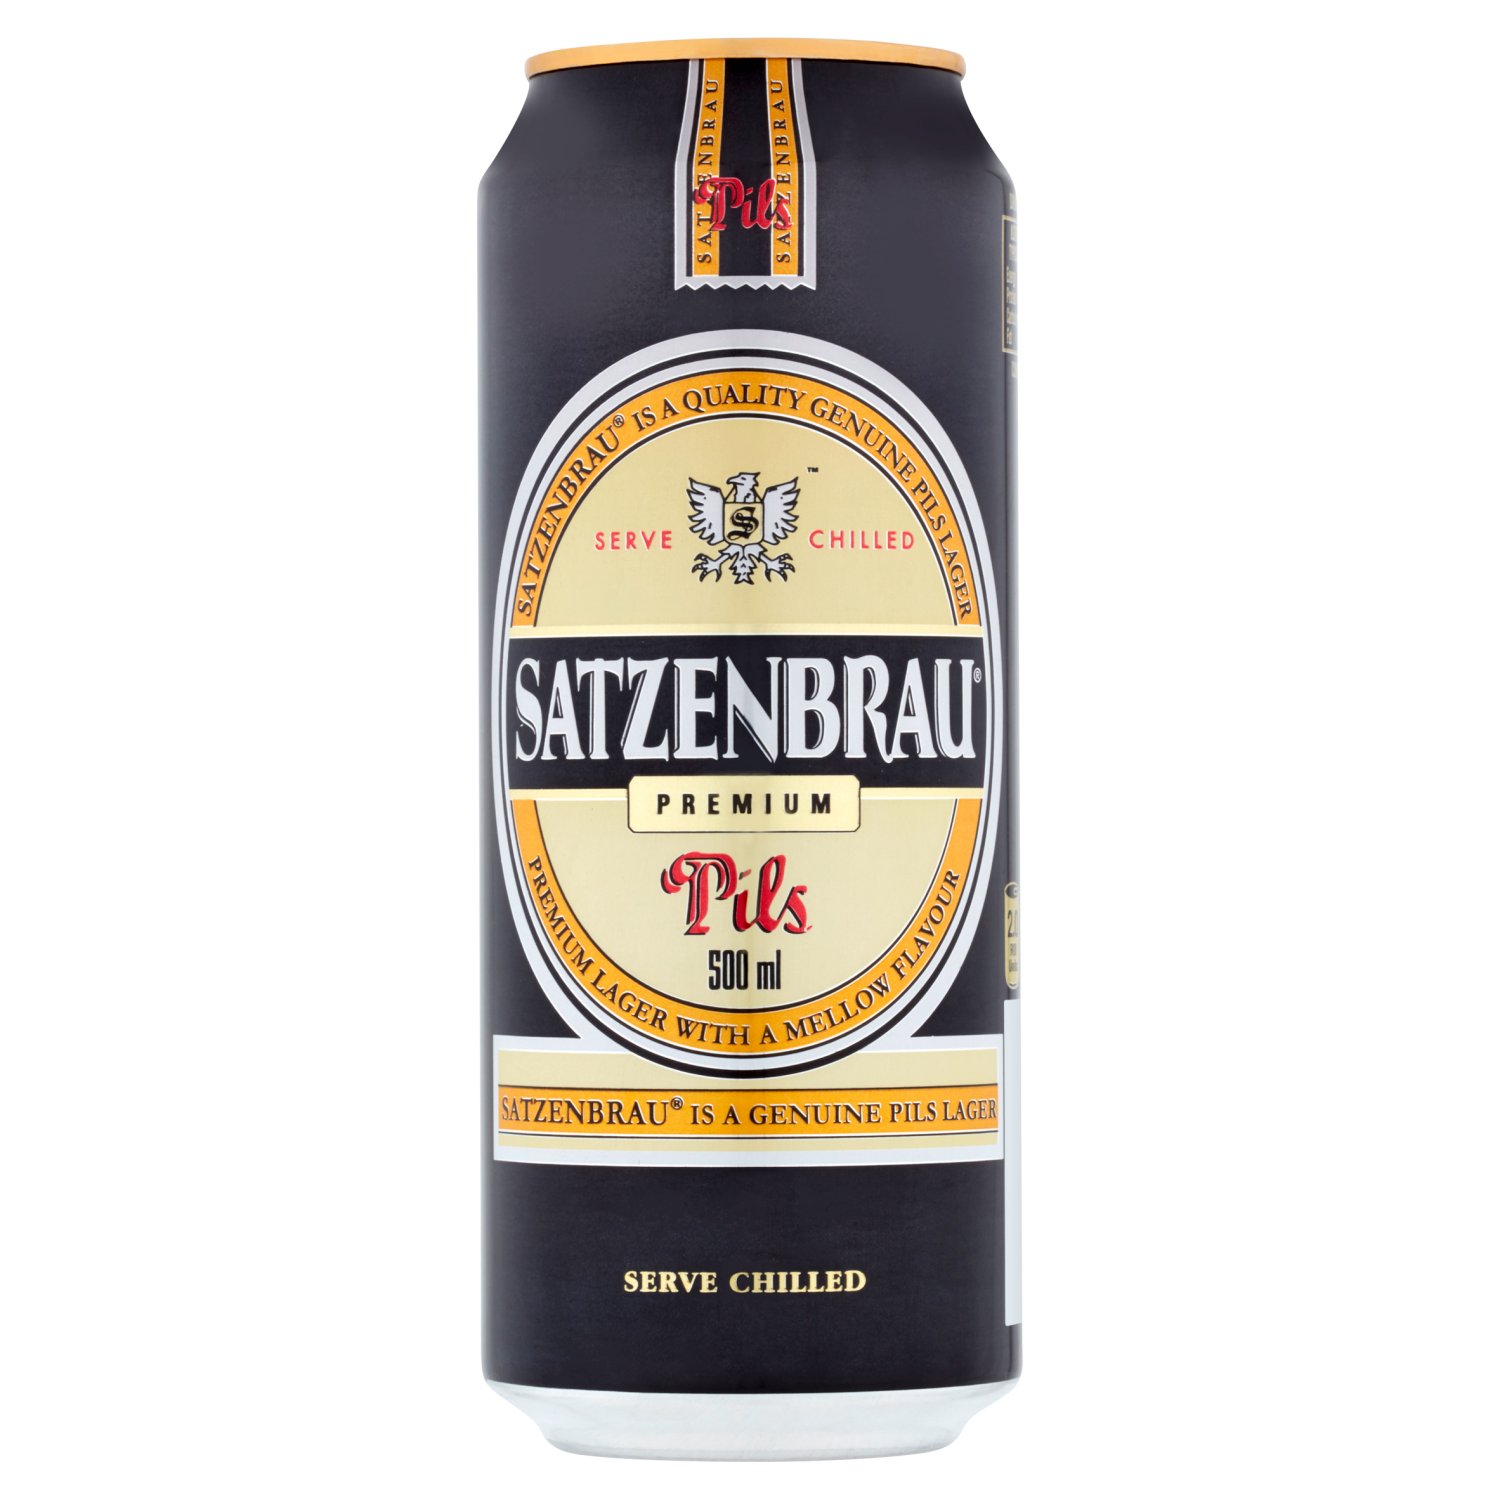 Satzenbrau® is a quality genuine pils lager

Satzenbrau® Pils is specially brewed to deliver the dry Pils flavour and the distinct smoothness of a premium quality lager.